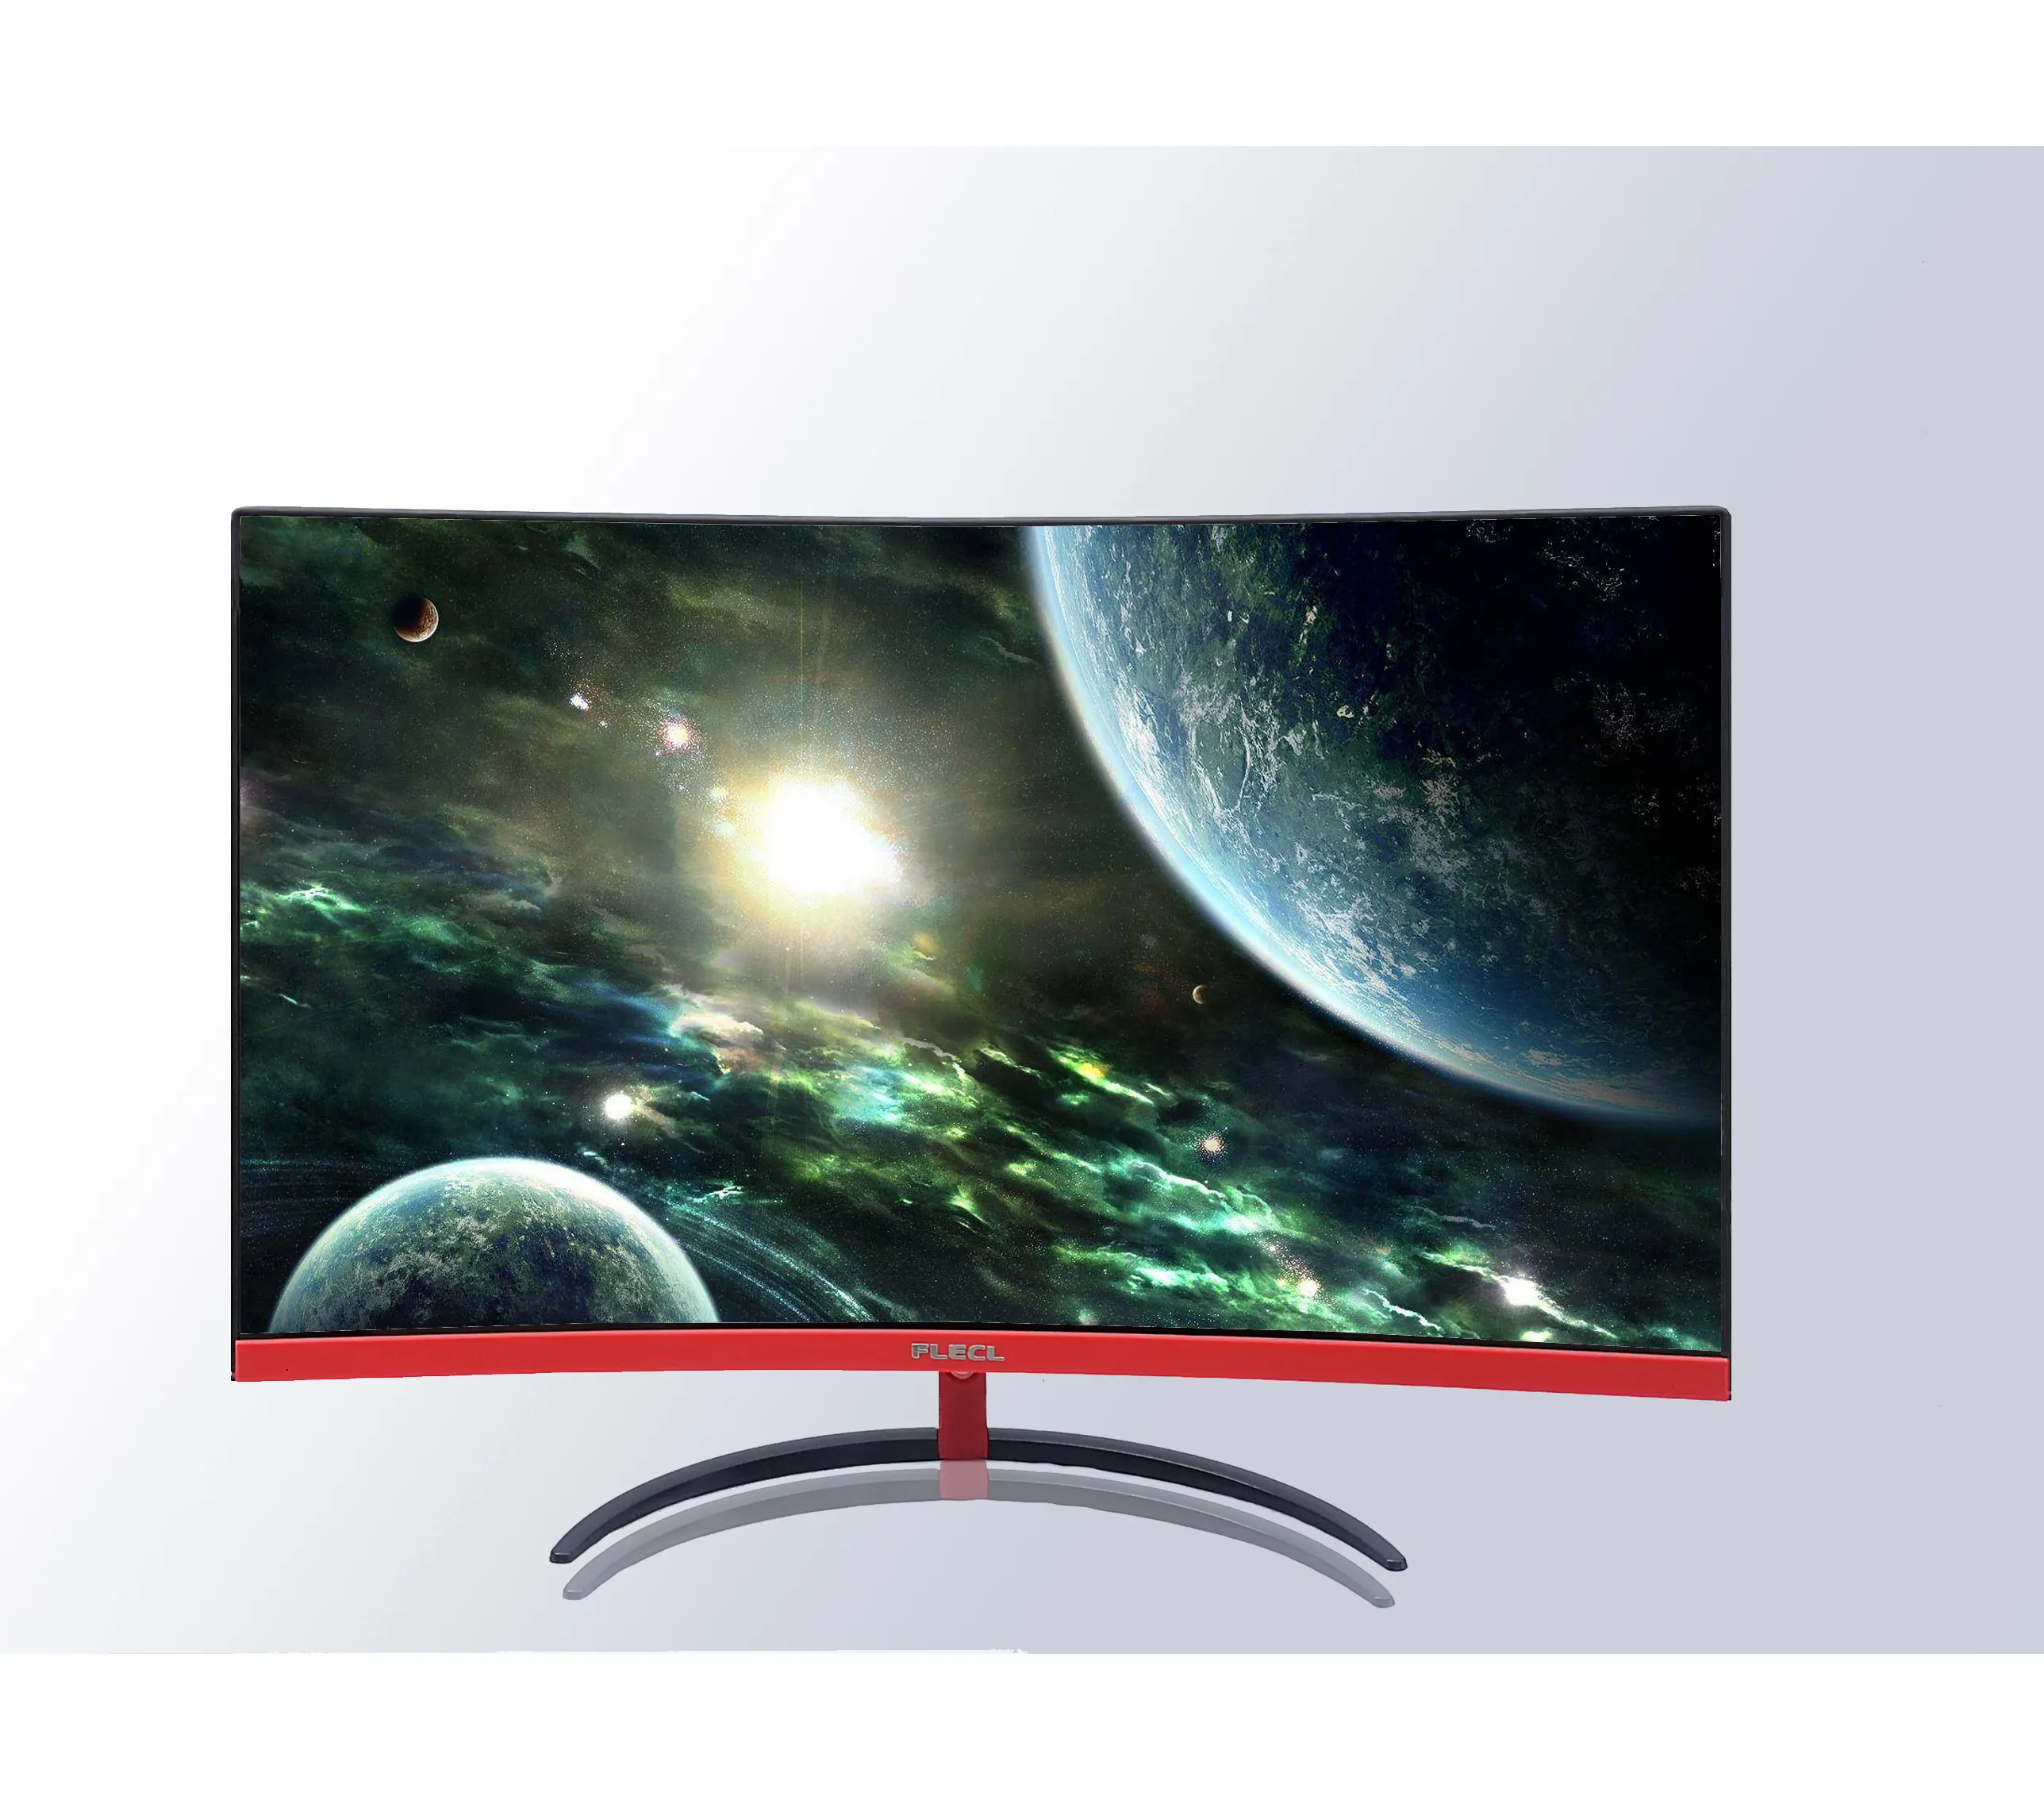 Factory Wholesale FHD resolution 21.5 inch flat screen LCD PC gaming monitor 75hz 144HZ led desktop Computer monitor